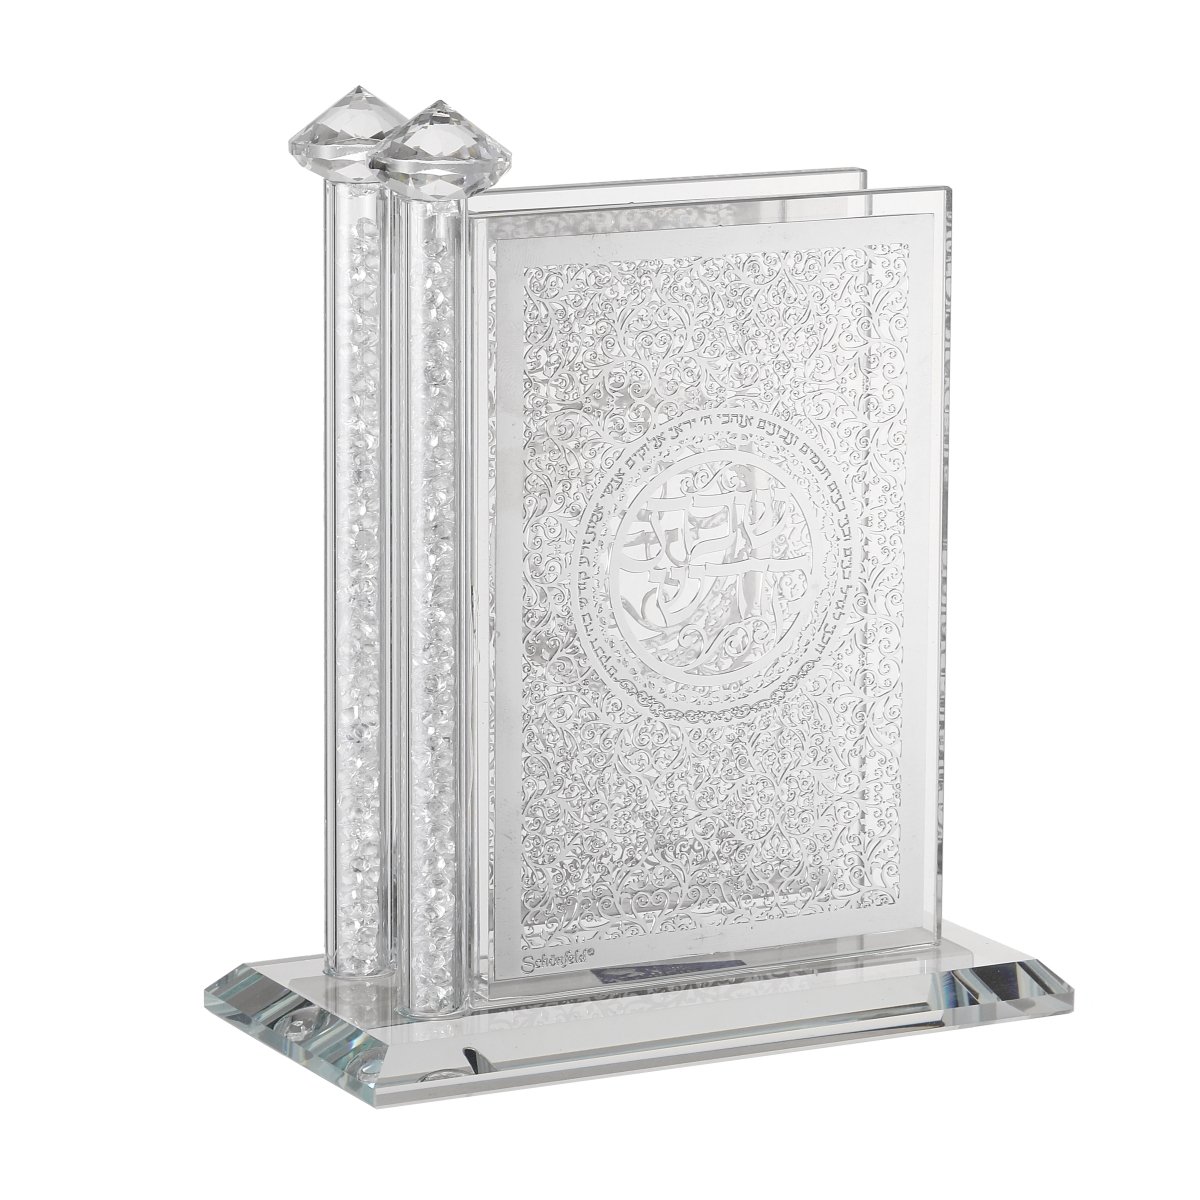 Picture of Schonfeld Collection 182458 Shabbos Kodesh Match Box with Silver Plate